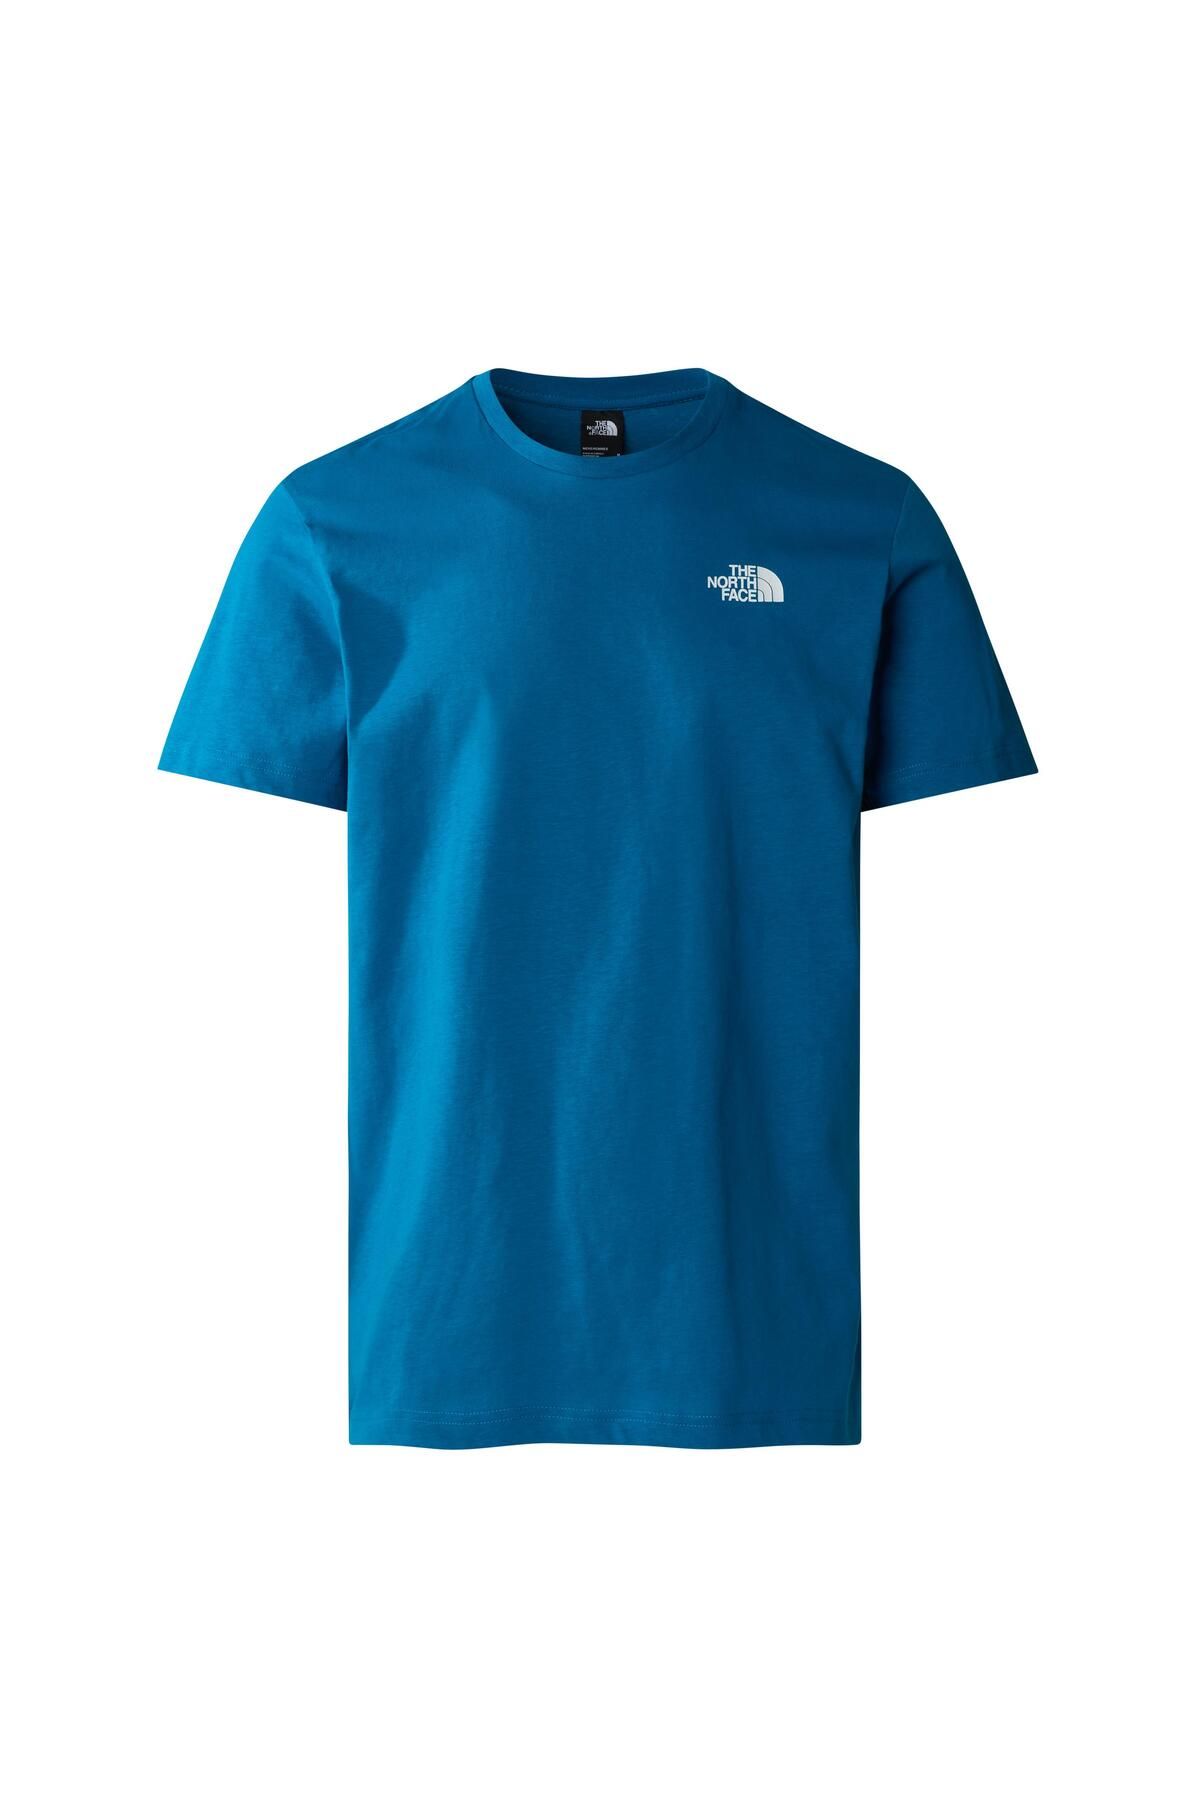 The North Face M S/S REDBOX CELEBRATION TEE BLUE